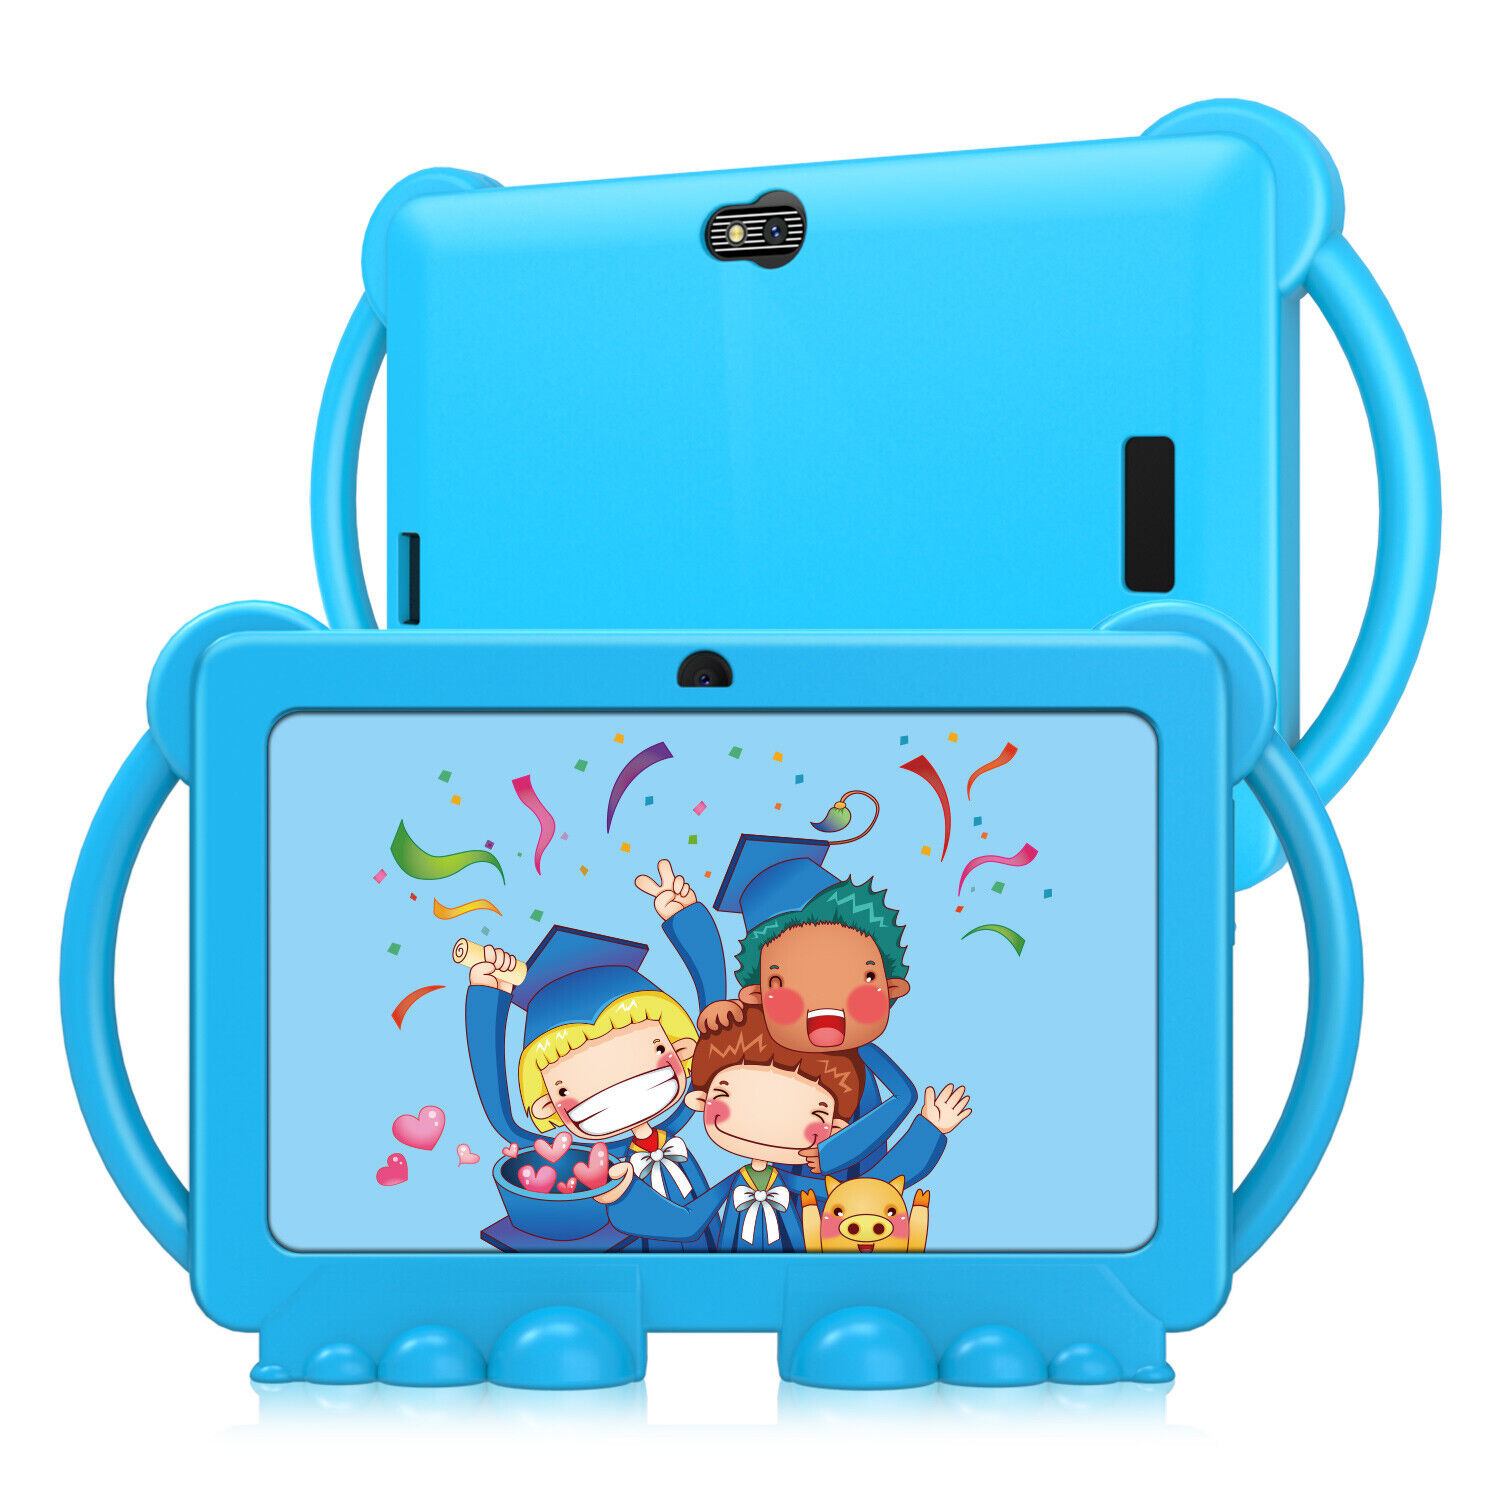 2021 Newest Android Toddler Tablet PC 7 Inch 2GB RAM 16GB Dual Camera HD 4-Core